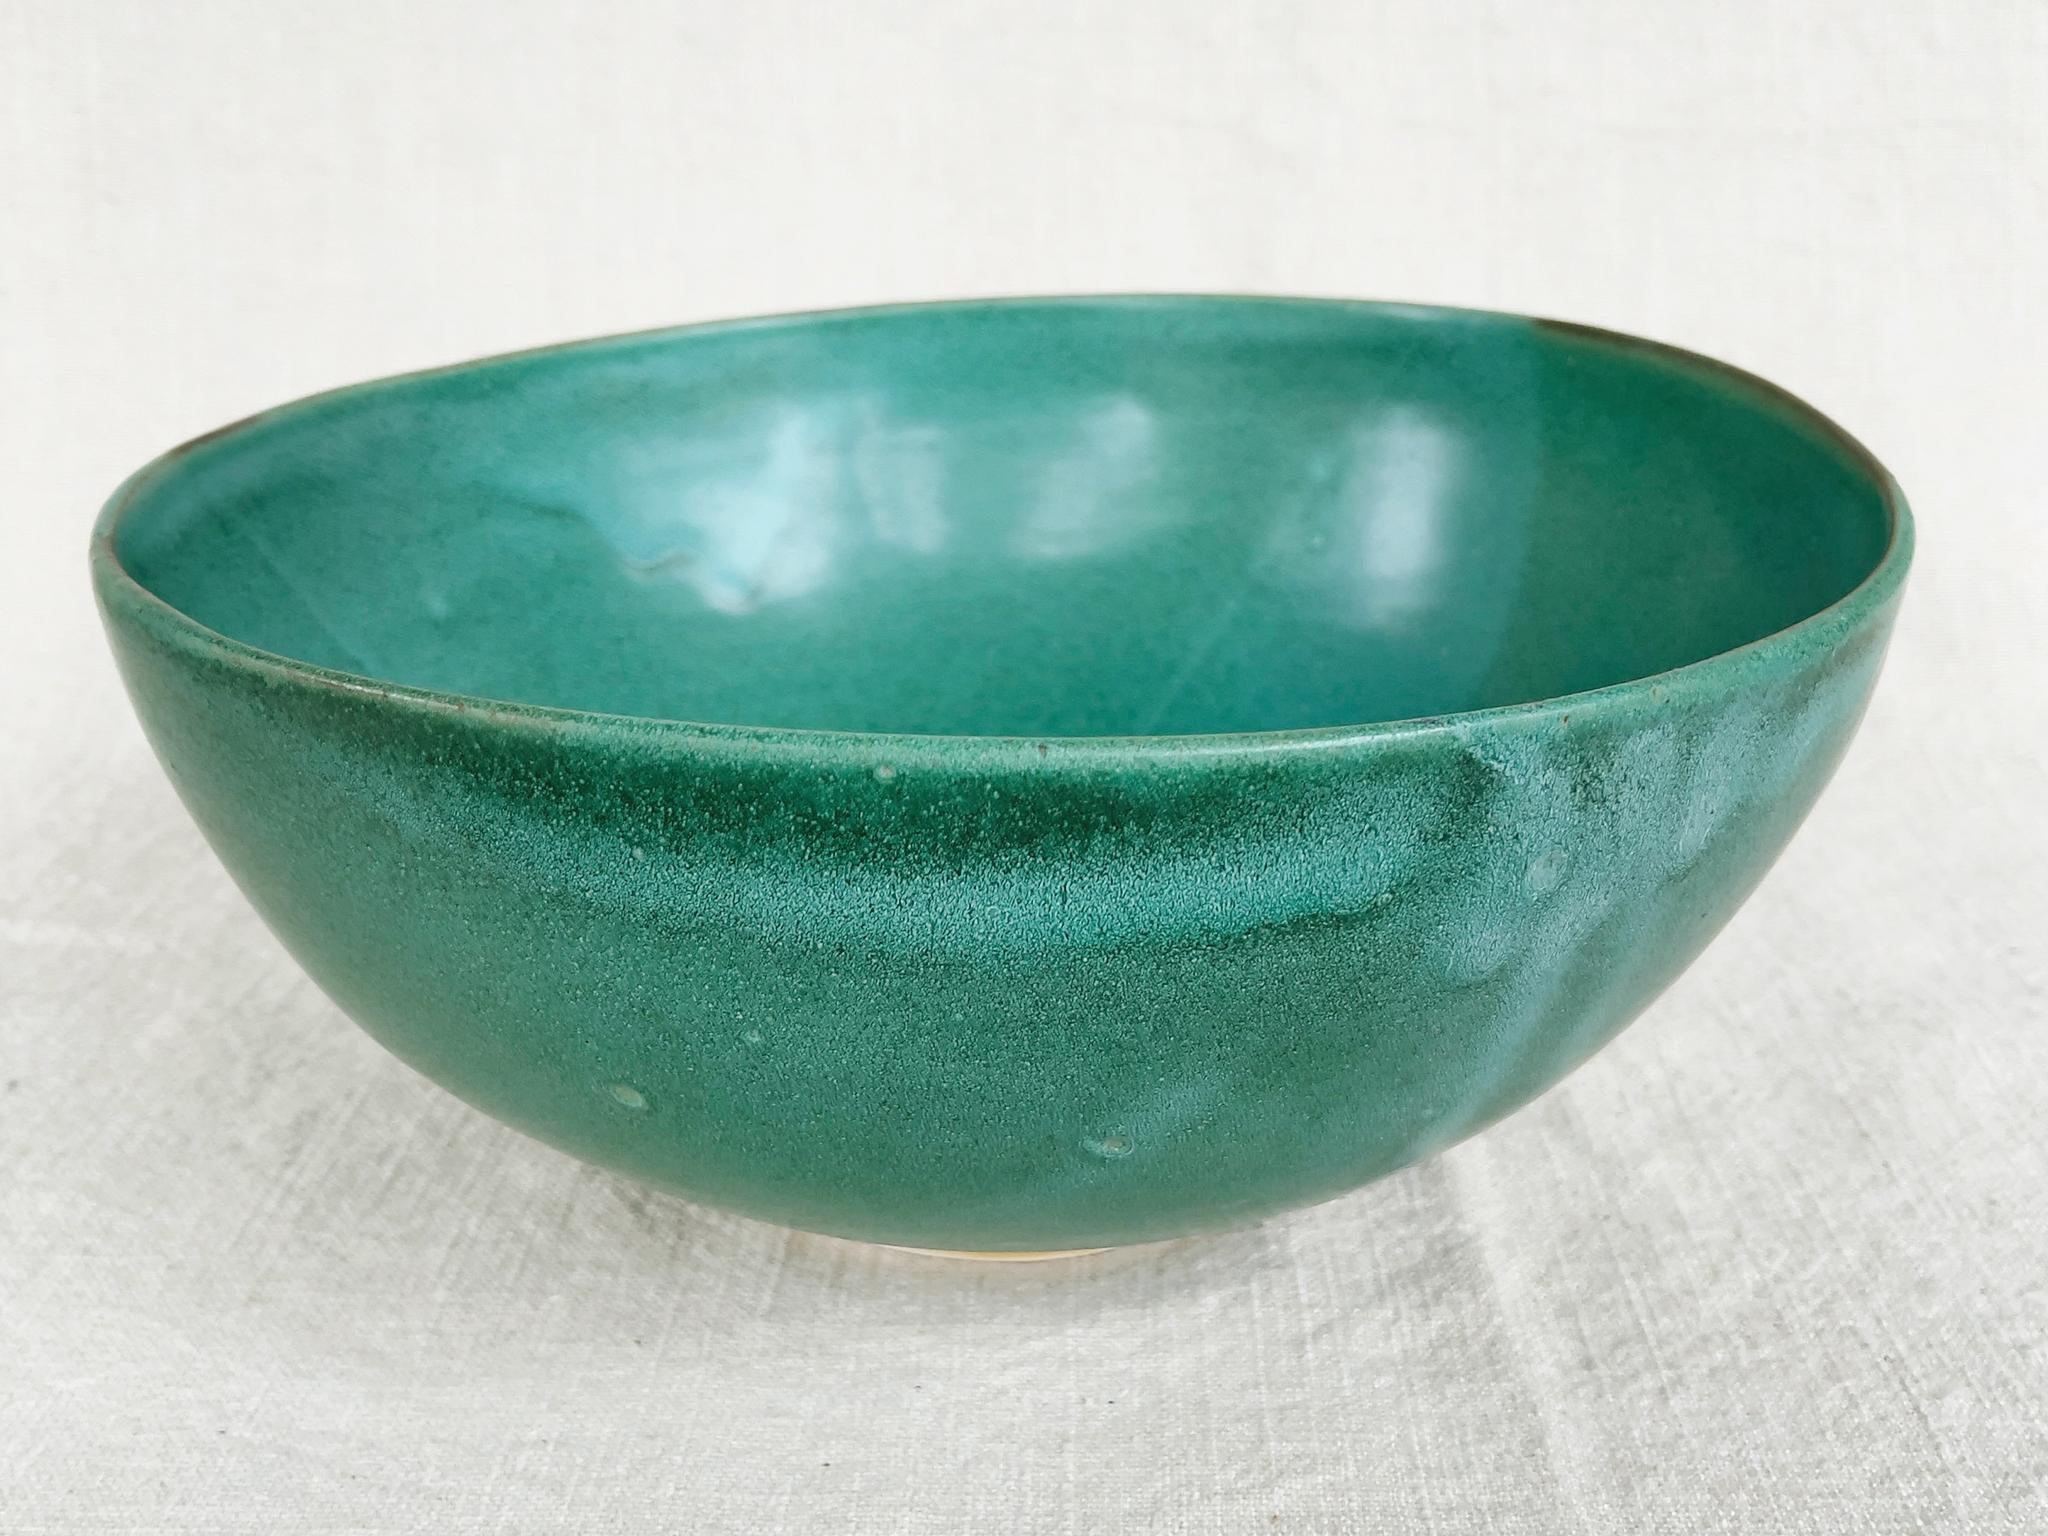 From Thom Lussier's Oxidized Copper Collection - a series of ceramic vessels that stand out for their brilliant palette and rich textures. This bowl is safe for food.

White stoneware with Cone 6 glaze.

Dimensions:
12 in. width
11.5 in. depth
5 in.